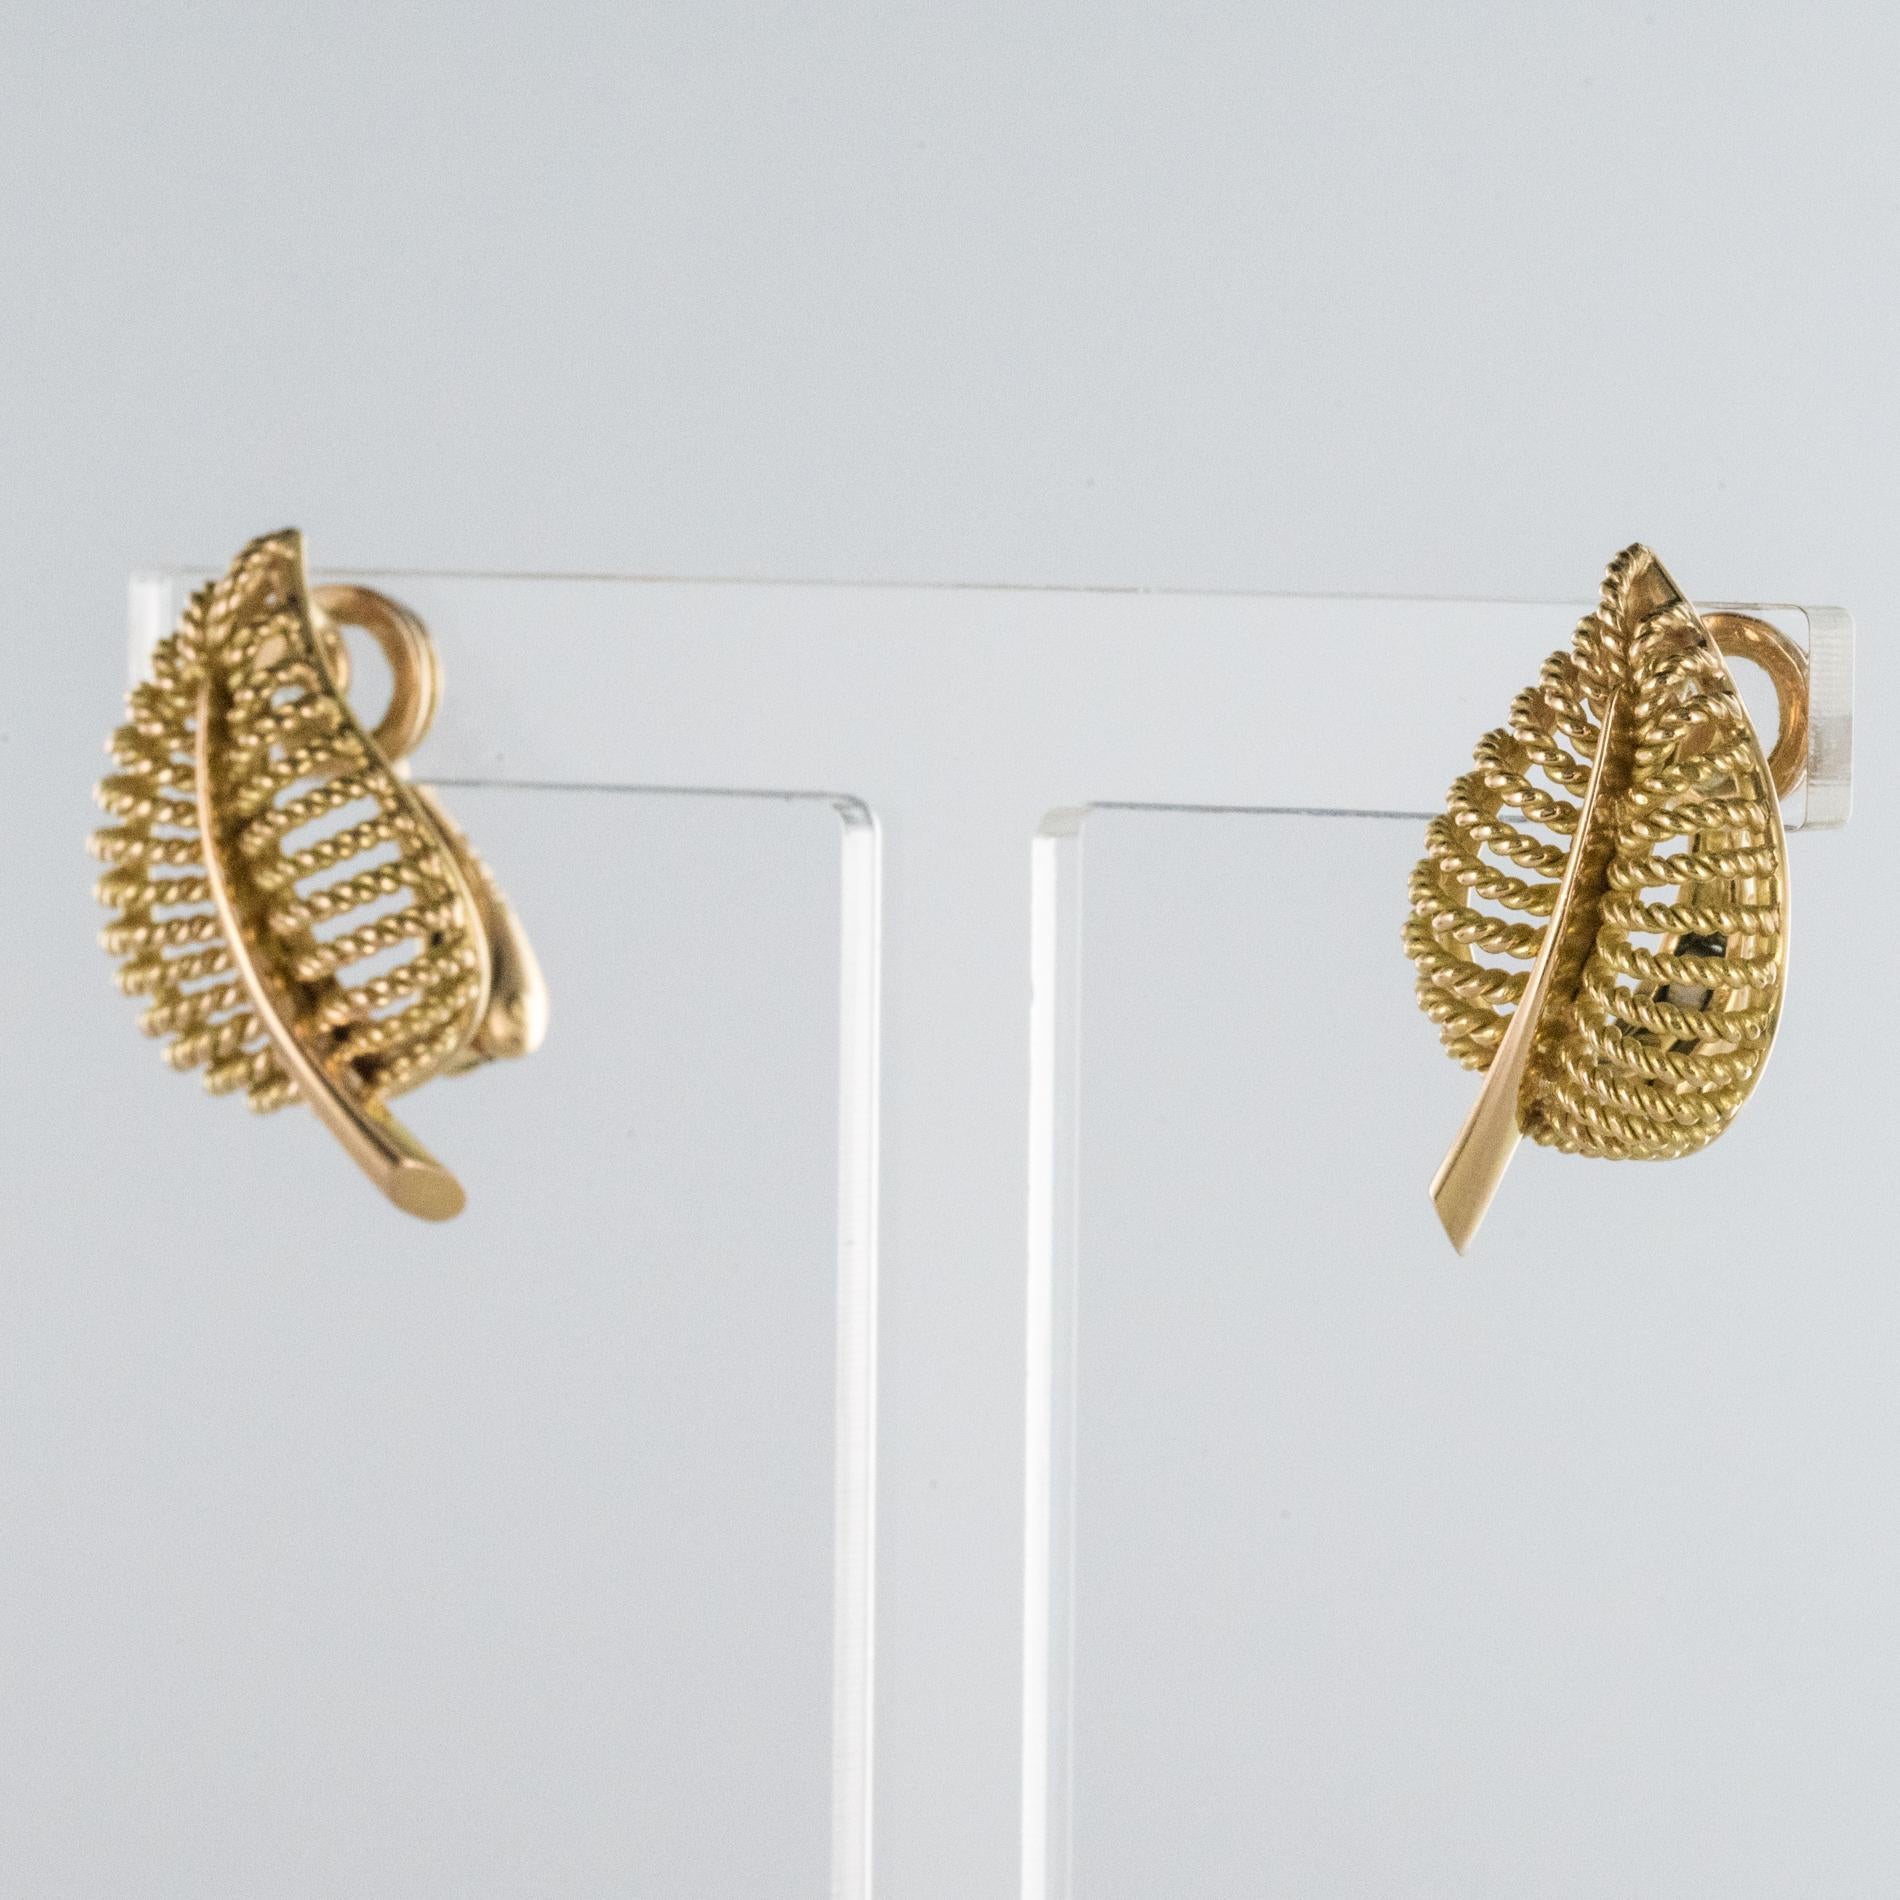 Retro 1980s French 18 Karat Yellow Gold Leaf Shaped Clip Earrings For Sale